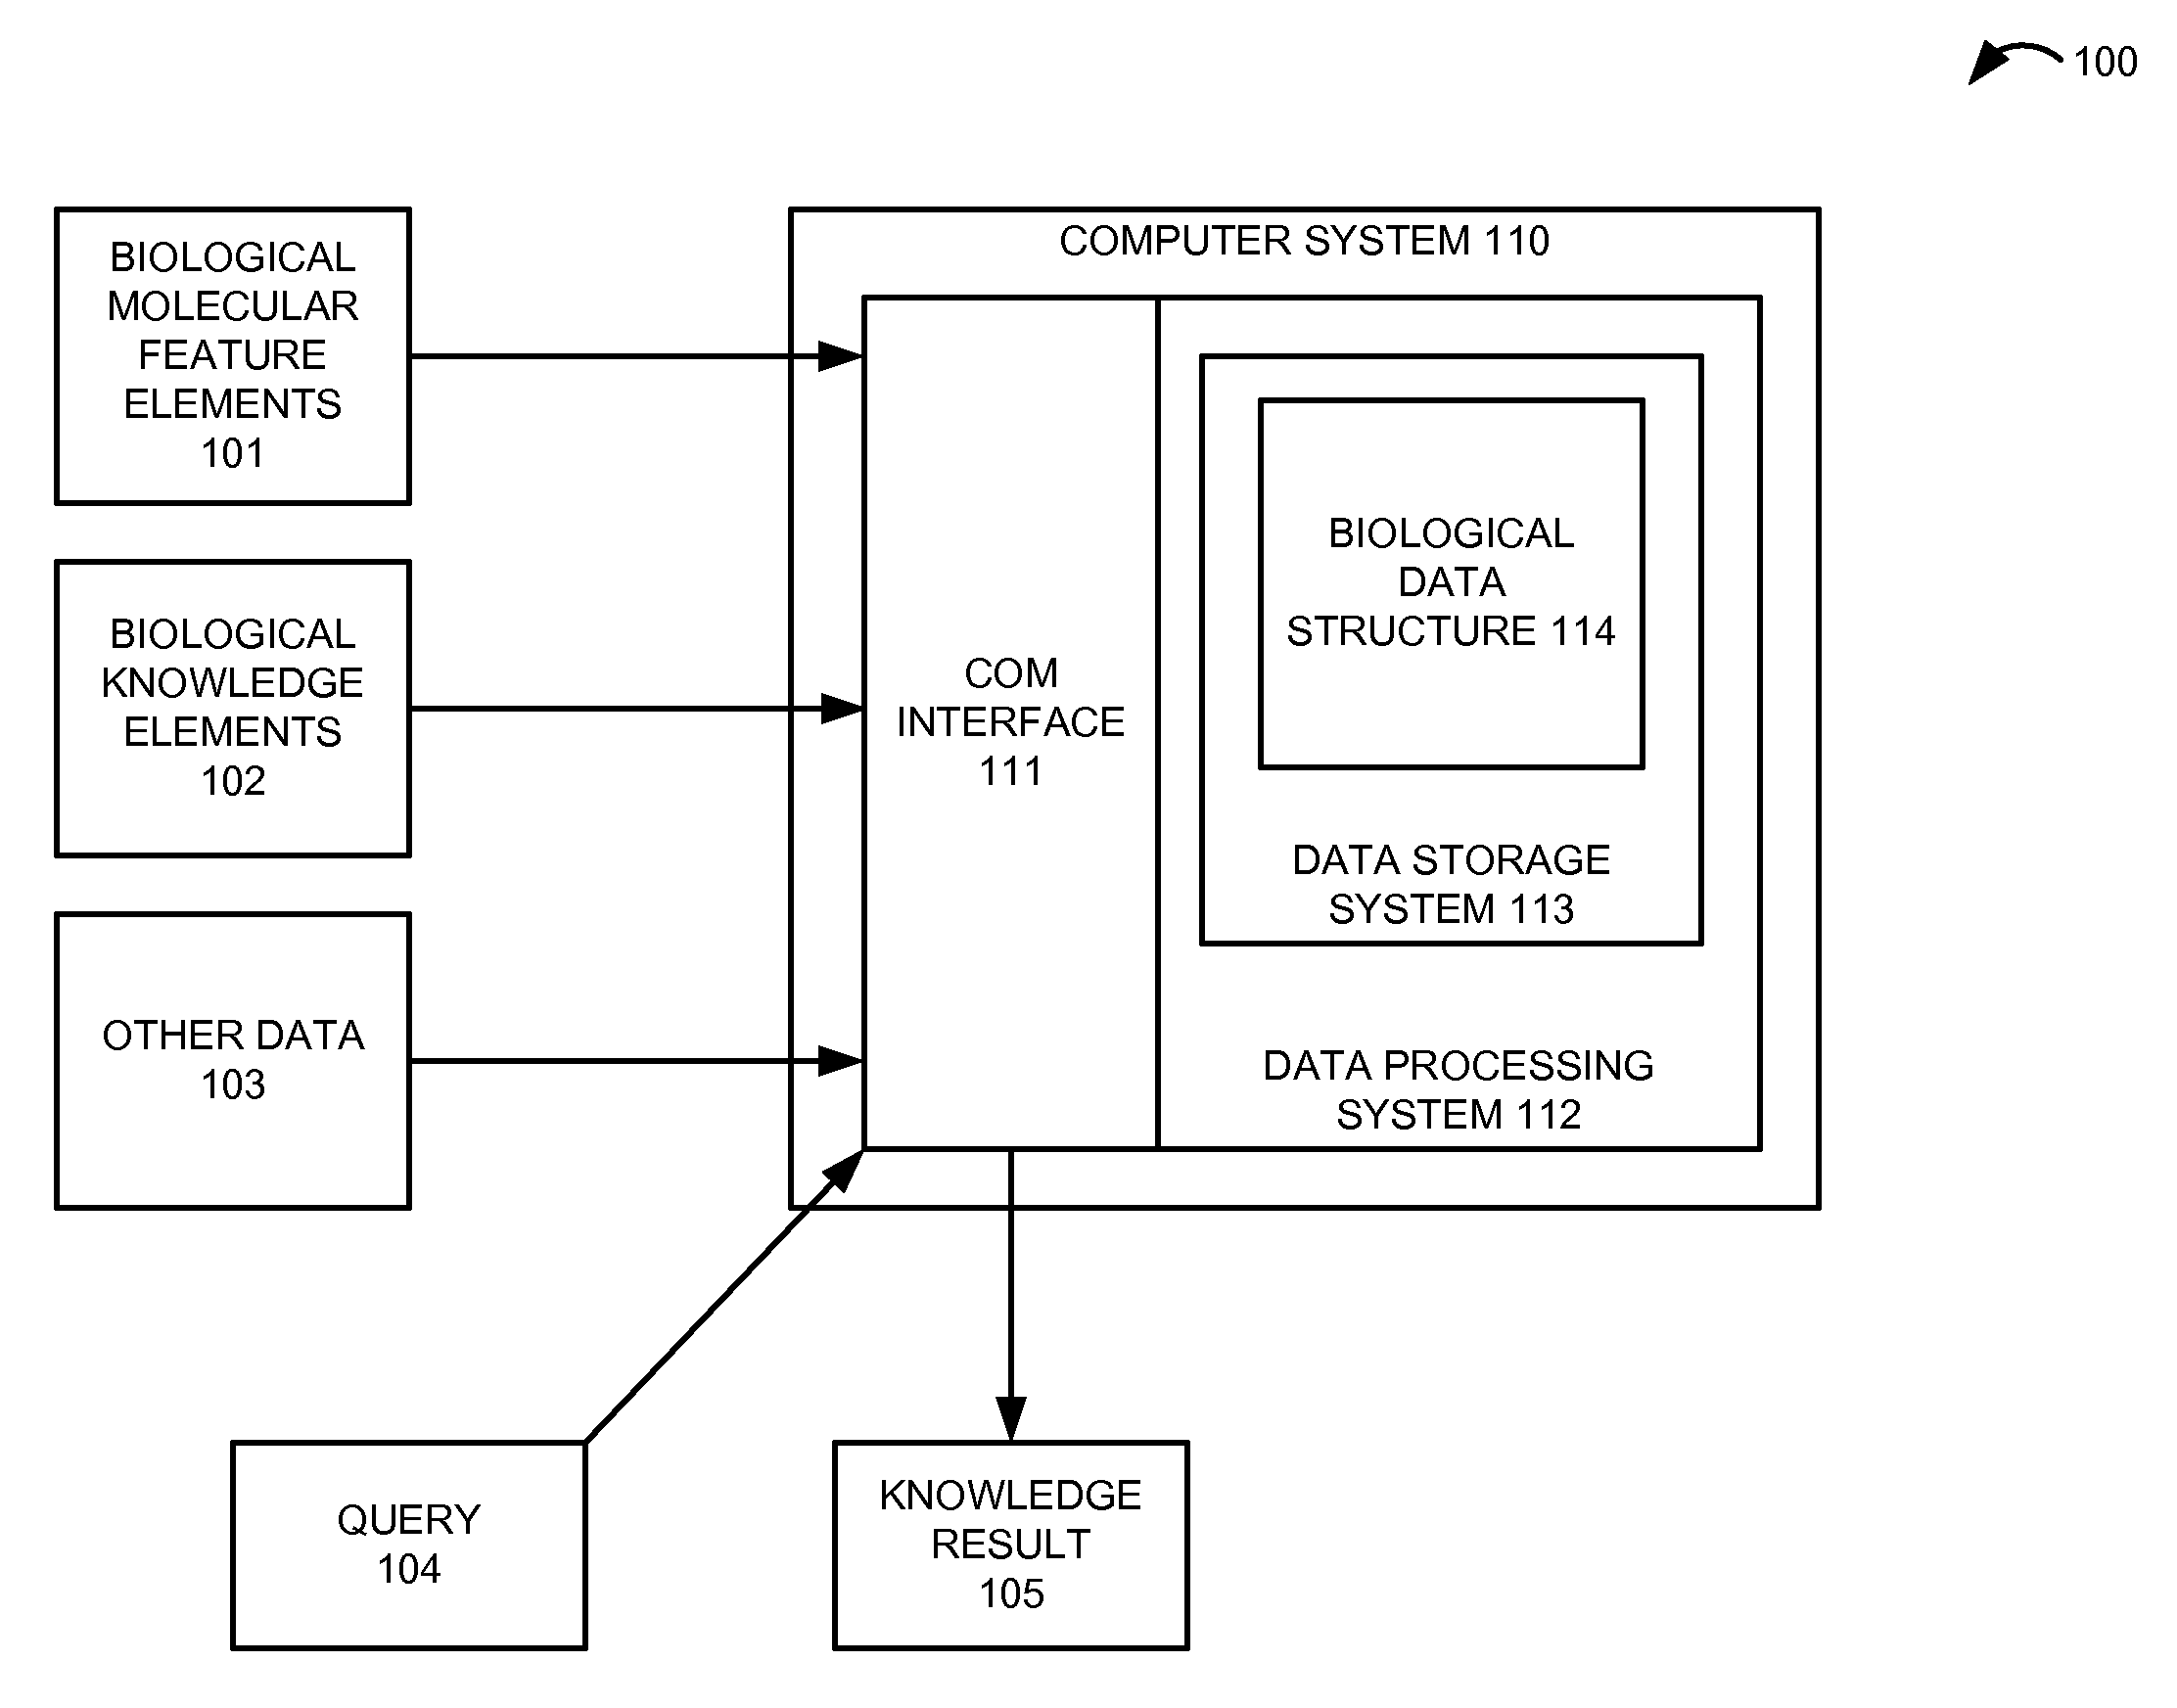 Biological data structure having multi-lateral, multi-scalar, and multi-dimensional relationships between molecular features and other data